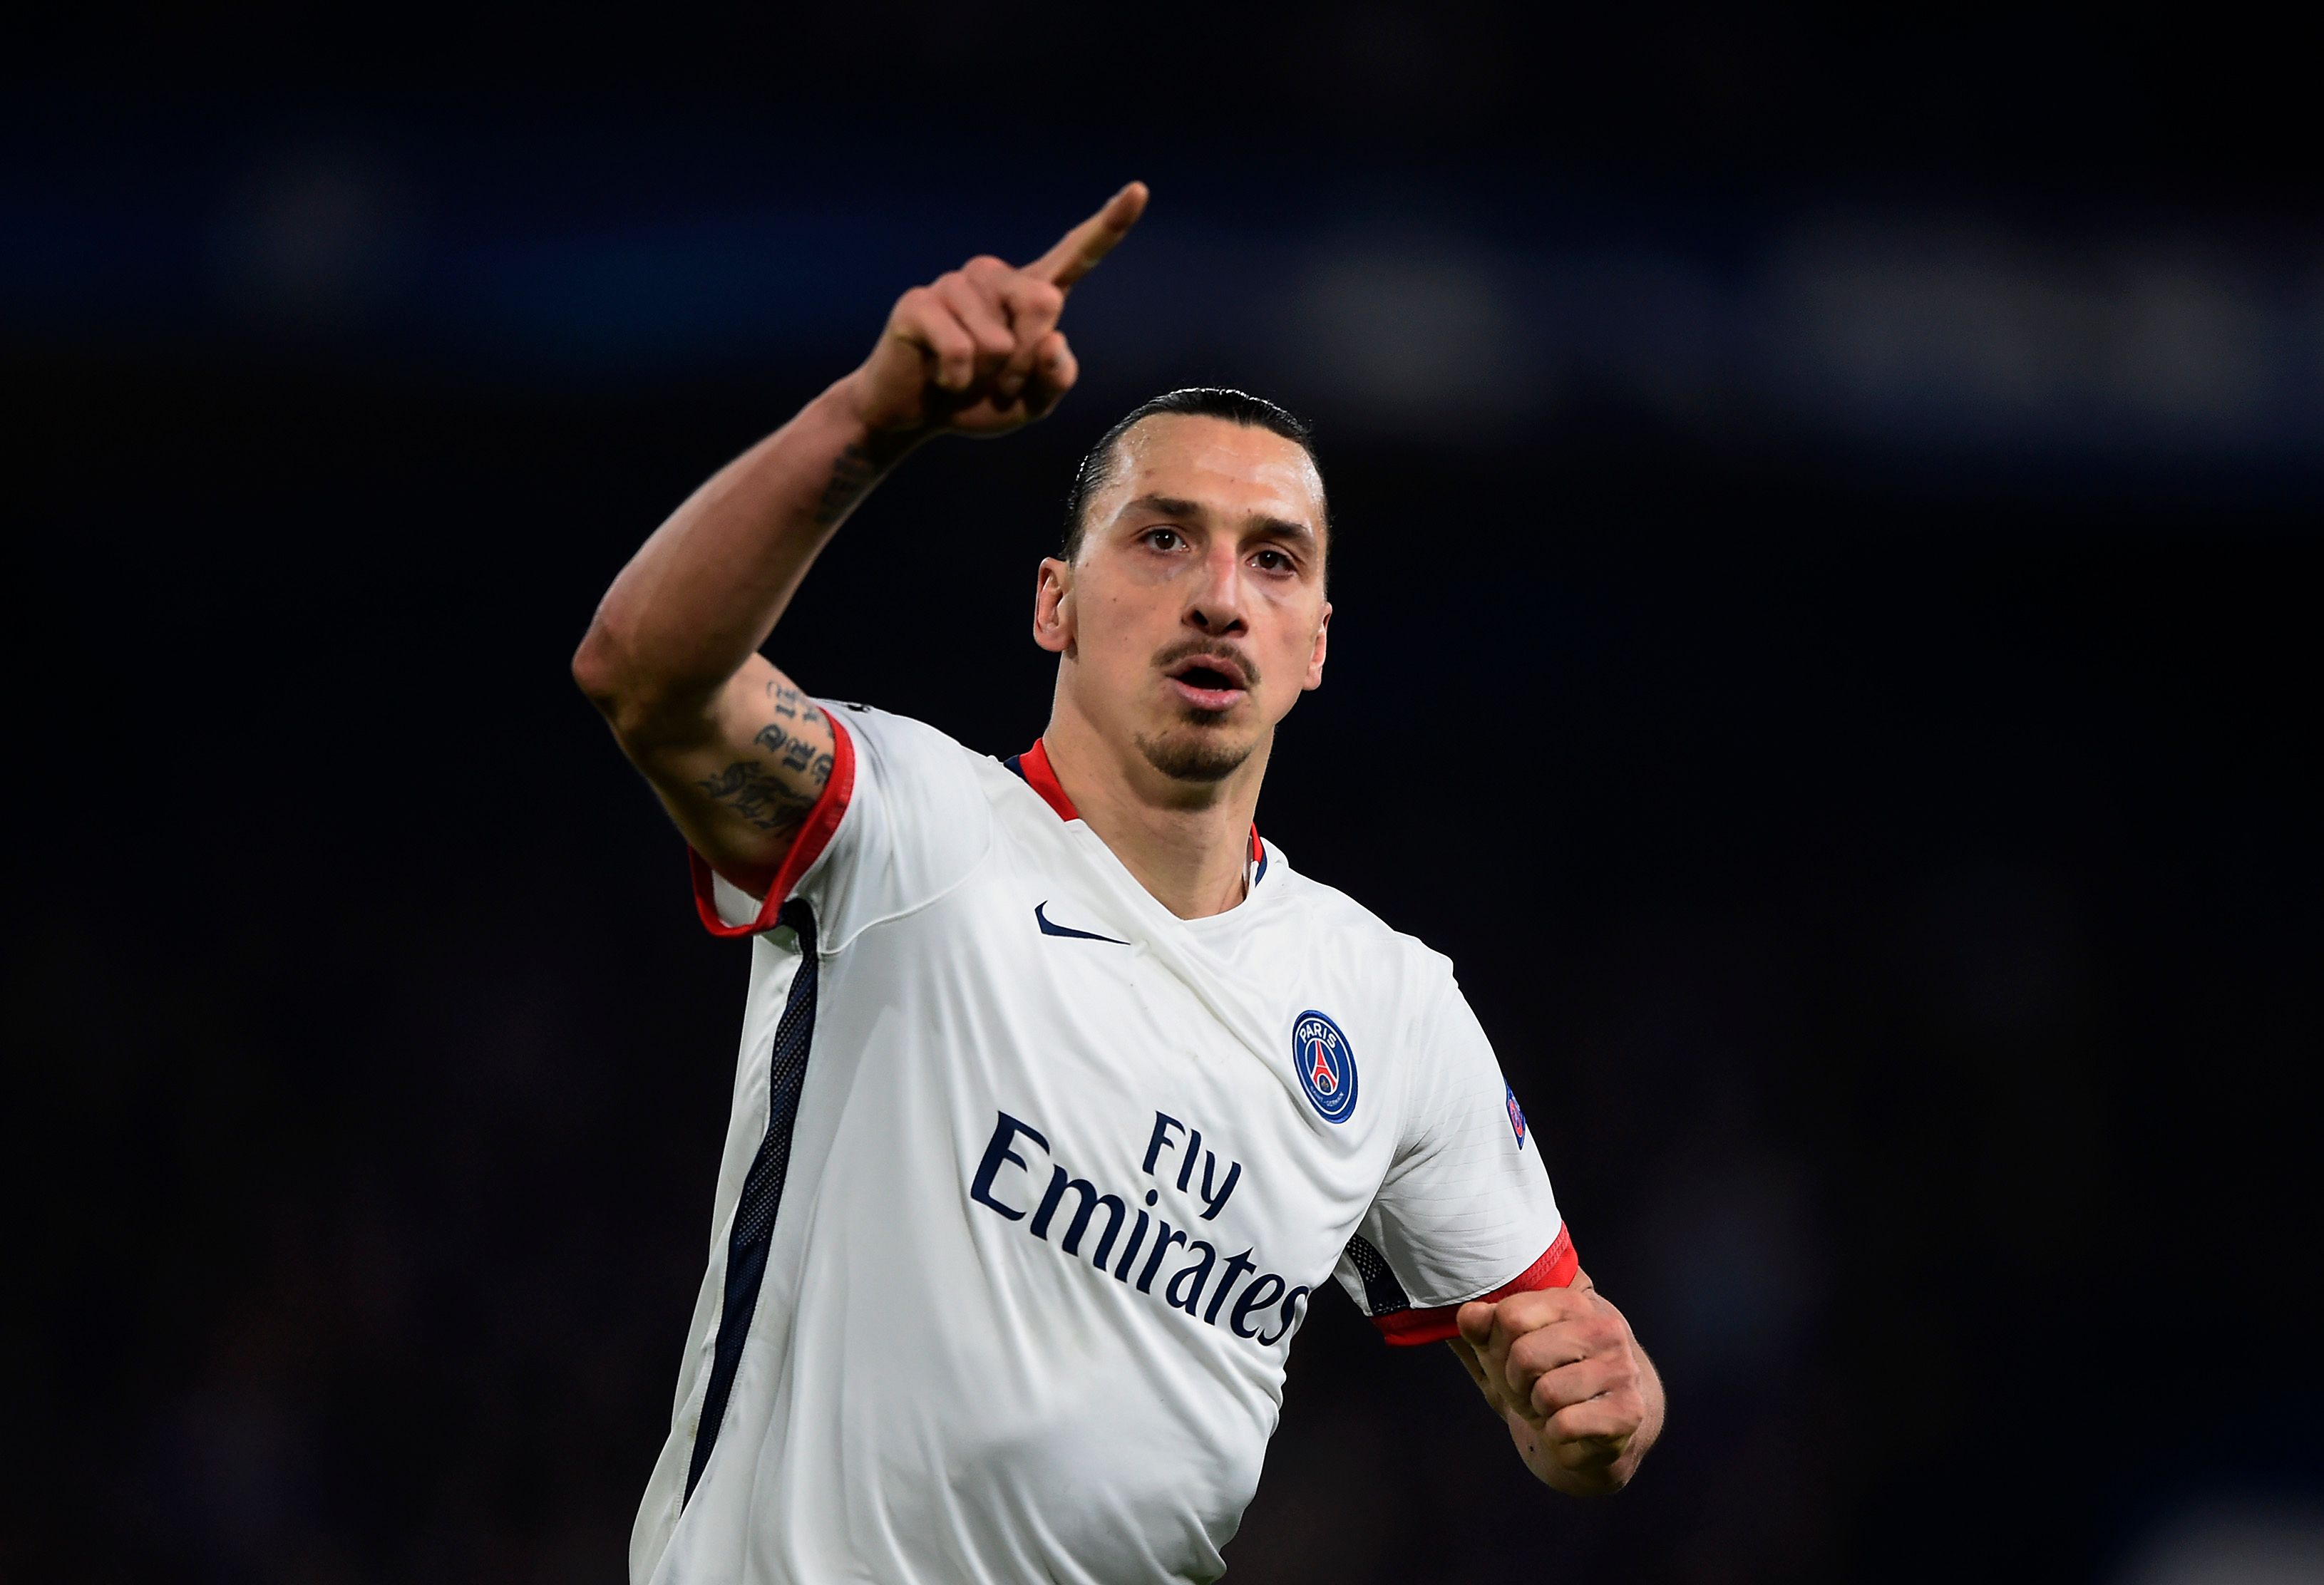  Zlatan Ibrahimovic of PSG celebrates after scoring his team's second goal during the UEFA Champions League round of 16, second leg match between Chelsea and Paris Saint Germain at Stamford Bridge on March 9, 2016 in London, United Kingdom